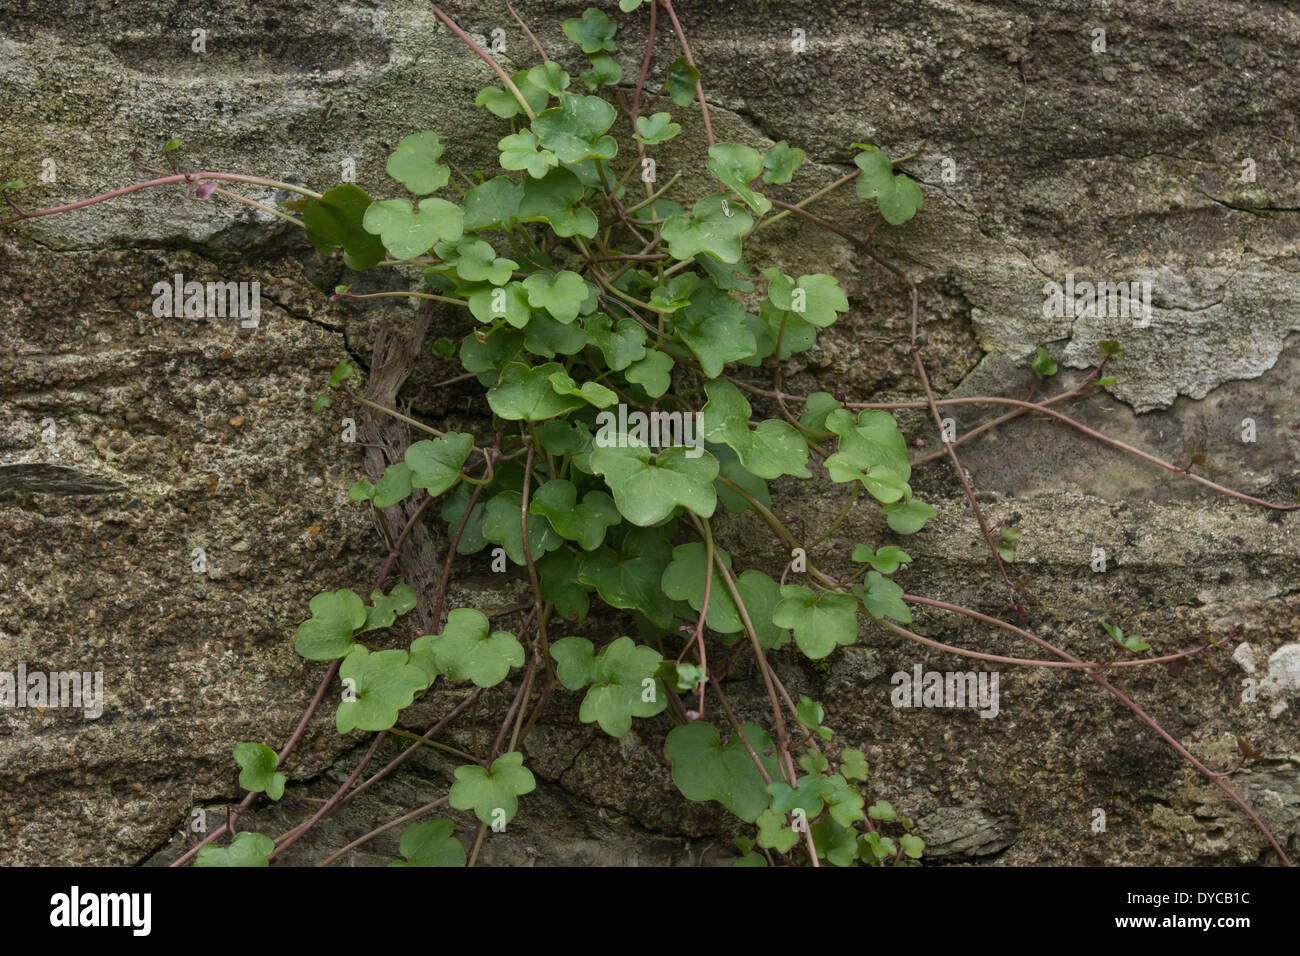 Ivy-leaved Toadflax / Cymbalaria muralis growing in a stone wall. Stock Photo